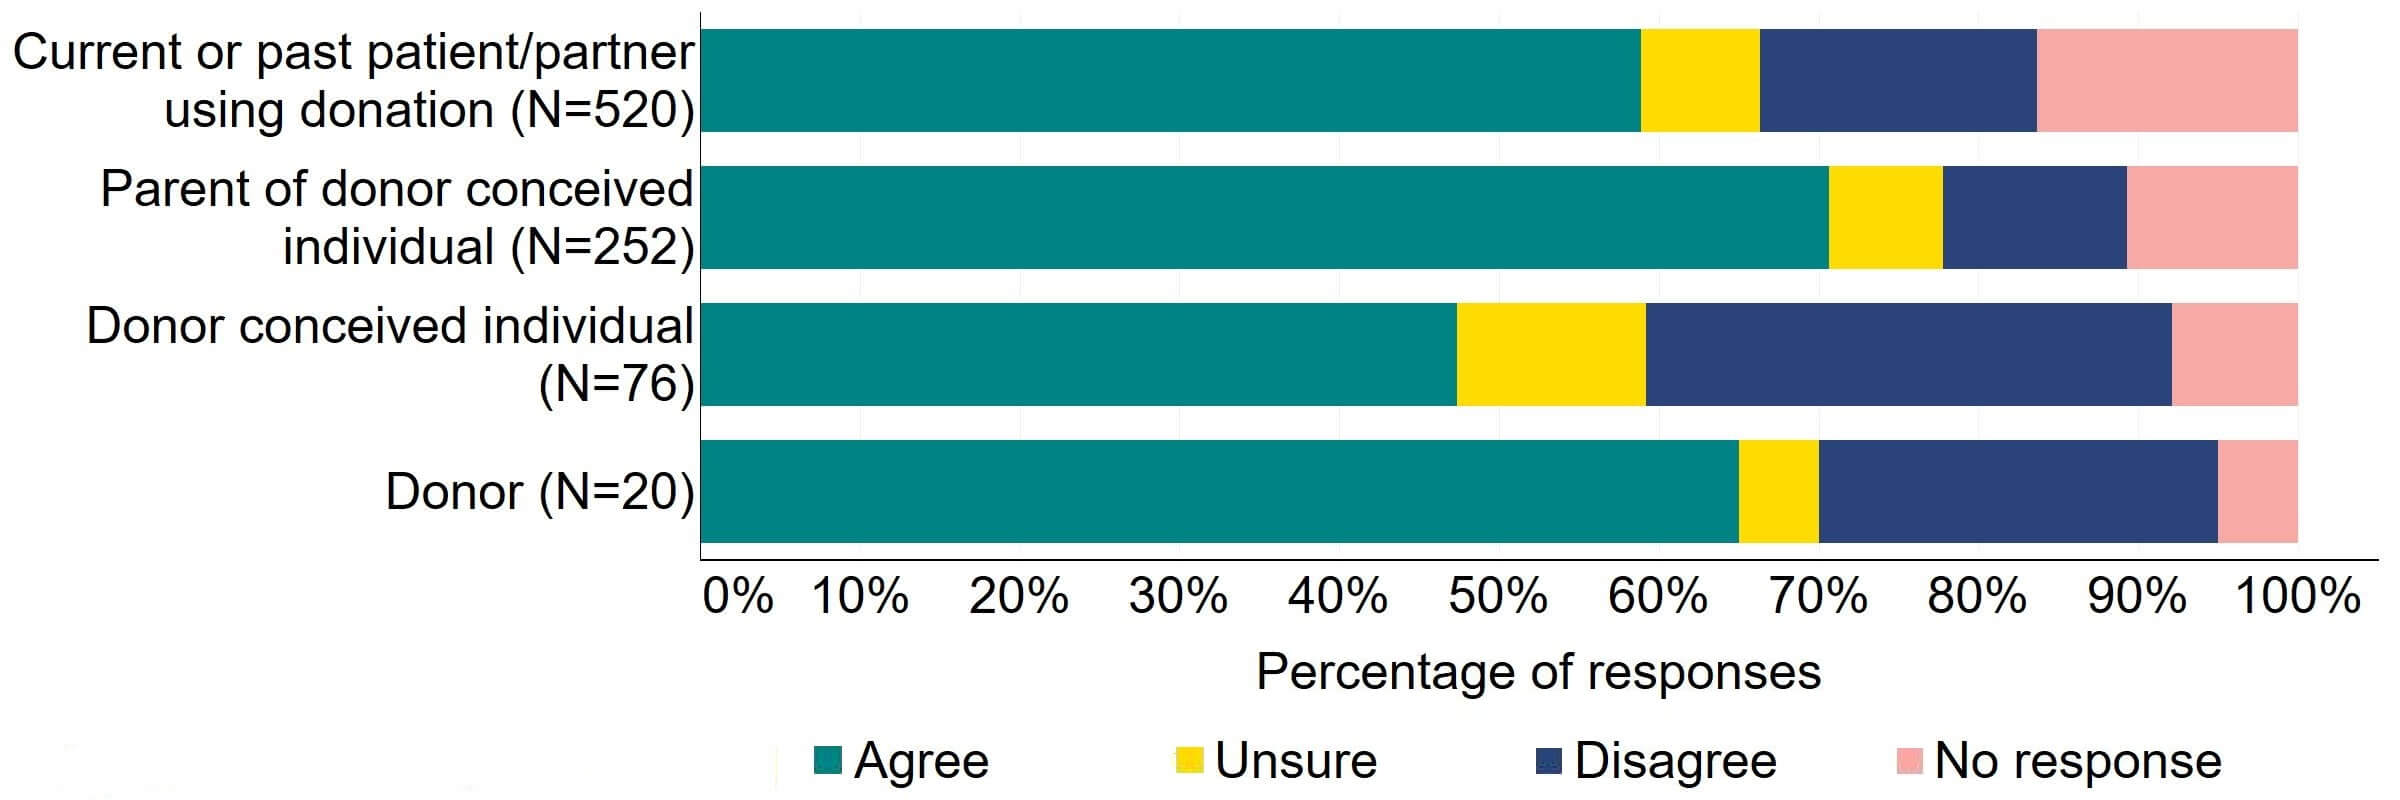 Figure 12 is a stacked bar chart showing the proportion of respondents broken down by patient type relating to donation who agreed, disagreed, were unsure, or who did not provide a response to the proposal. The underlying data can be downloaded as an Excel worksheet at the top of the page.